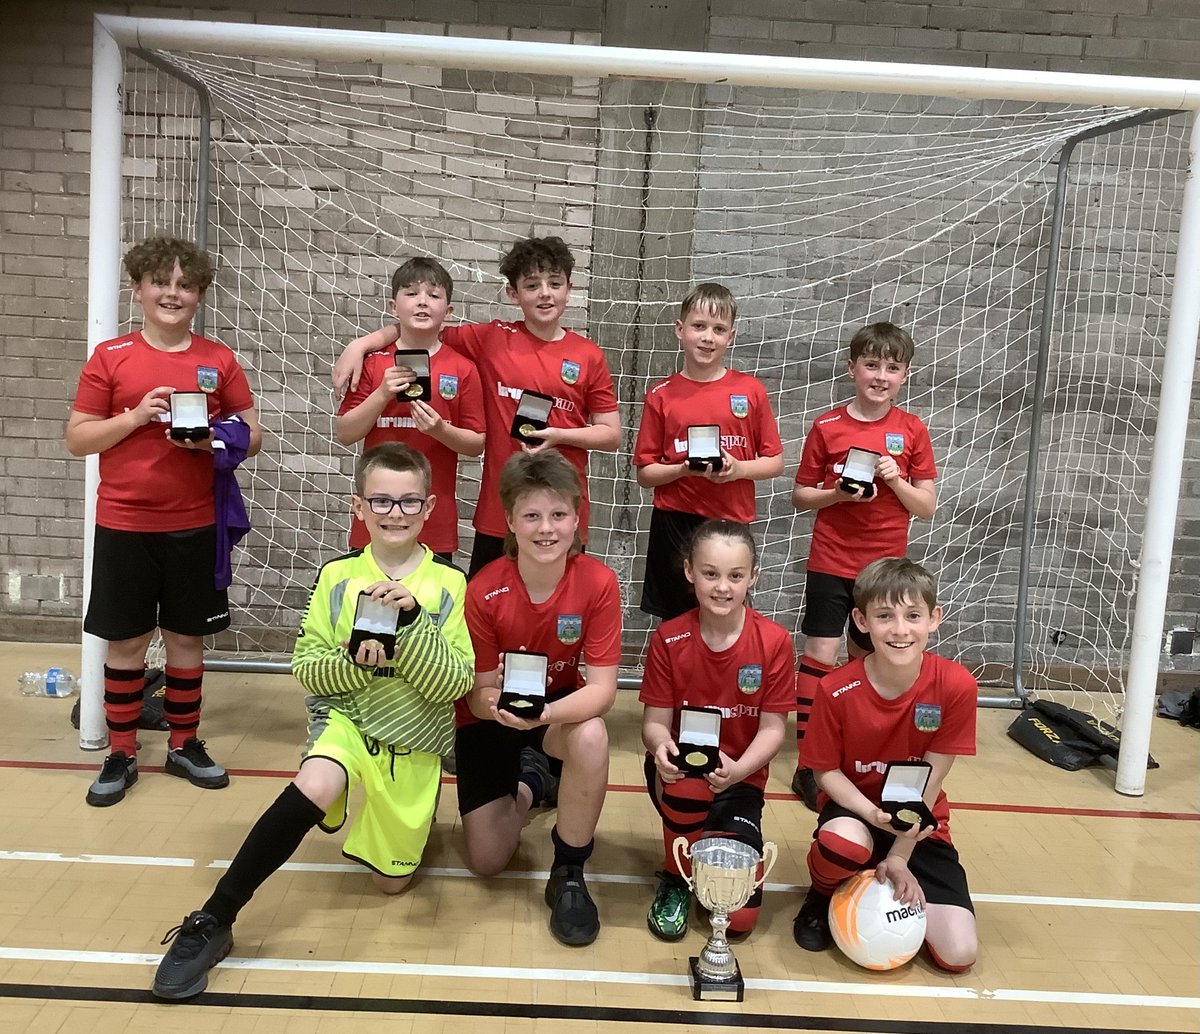 Our Dee Valley Federation Football team were fantastic at the festival which was brilliantly organised by @CefnCouncil. We were proud of how our team came together and made memories that will last a lifetime. Well done all 👏 @StAsaphDiocese @sportwales @DioStAsaphEdu ⚽️⚽️⚽️